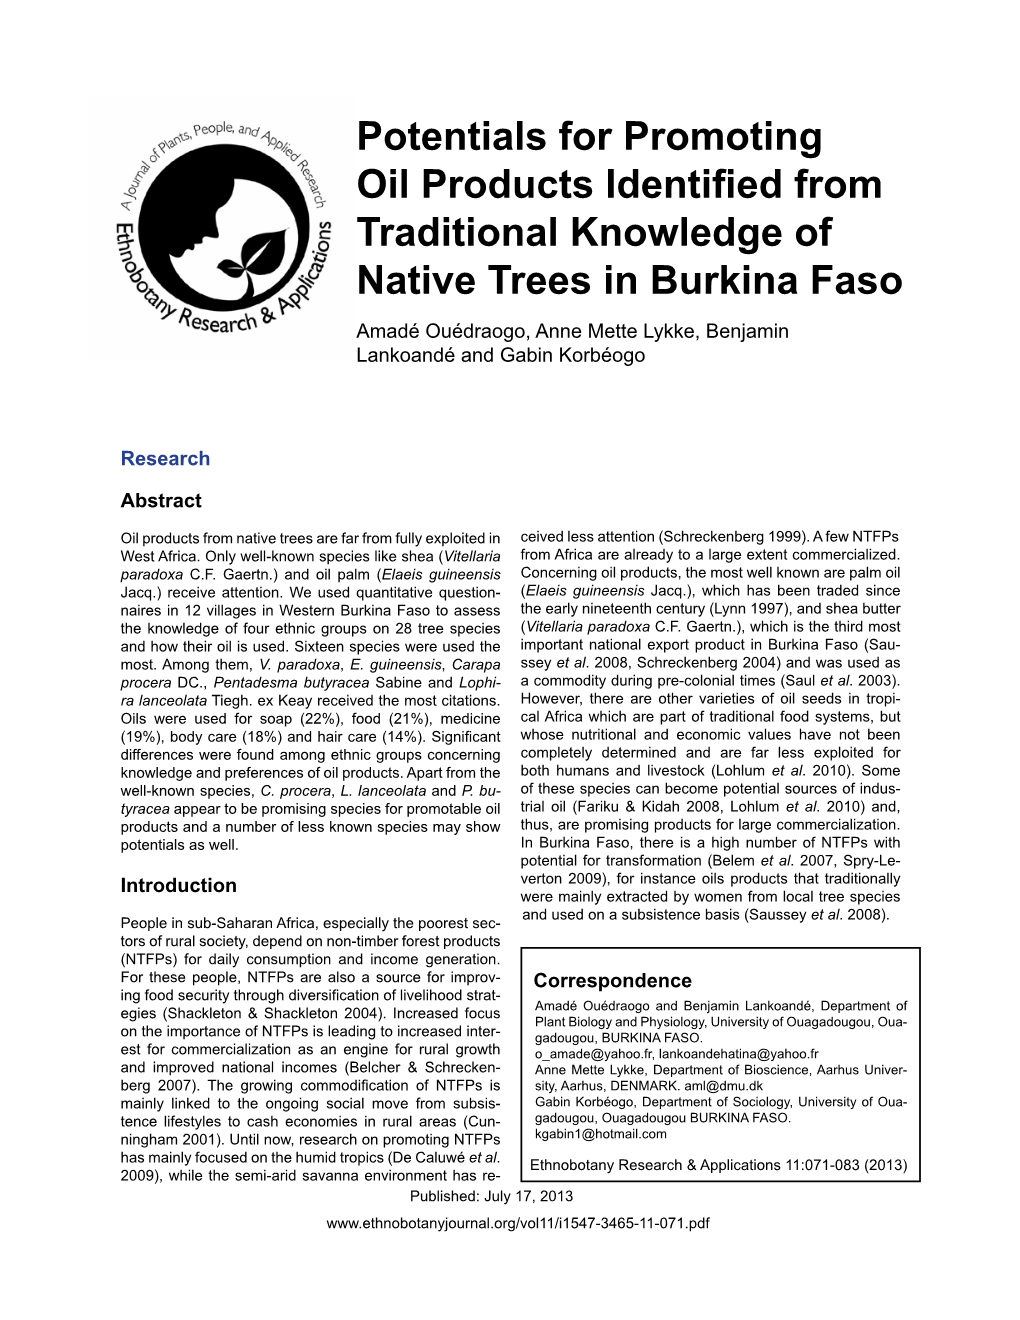 Potentials for Promoting Oil Products Identified from Traditional